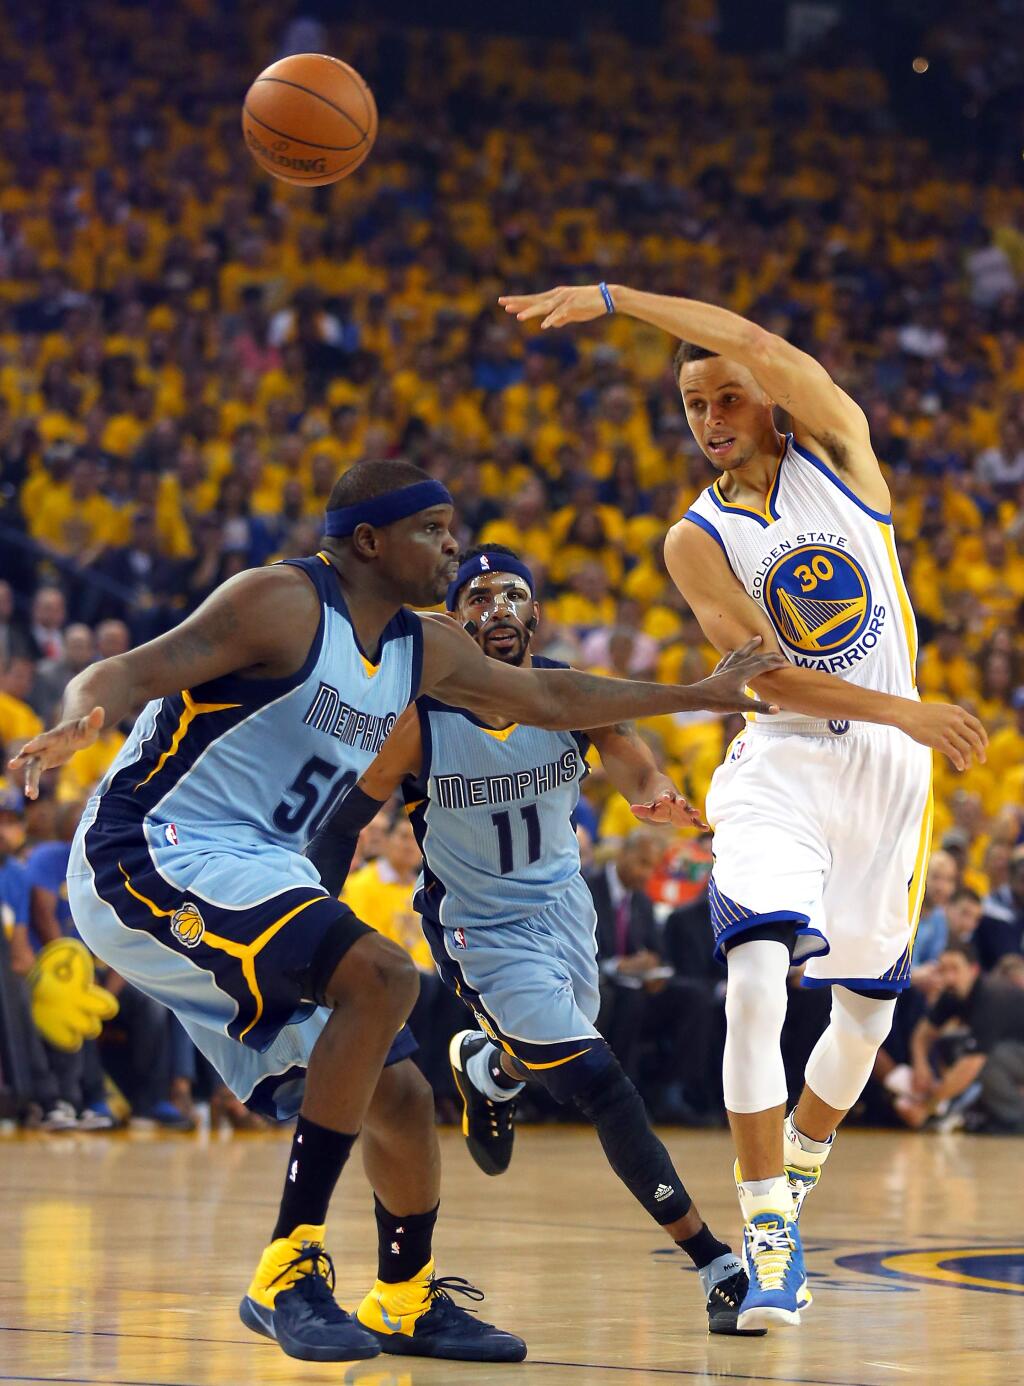 Golden State Warriors guard Stephen Curry passes the ball around Memphis Grizzlies forward Zach Randolph during Game 2 of the NBA Playoffs Western Conference Semifinals at Oracle Arena, in Oakland on Tuesday, May 5, 2015. (Christopher Chung/ The Press Democrat)